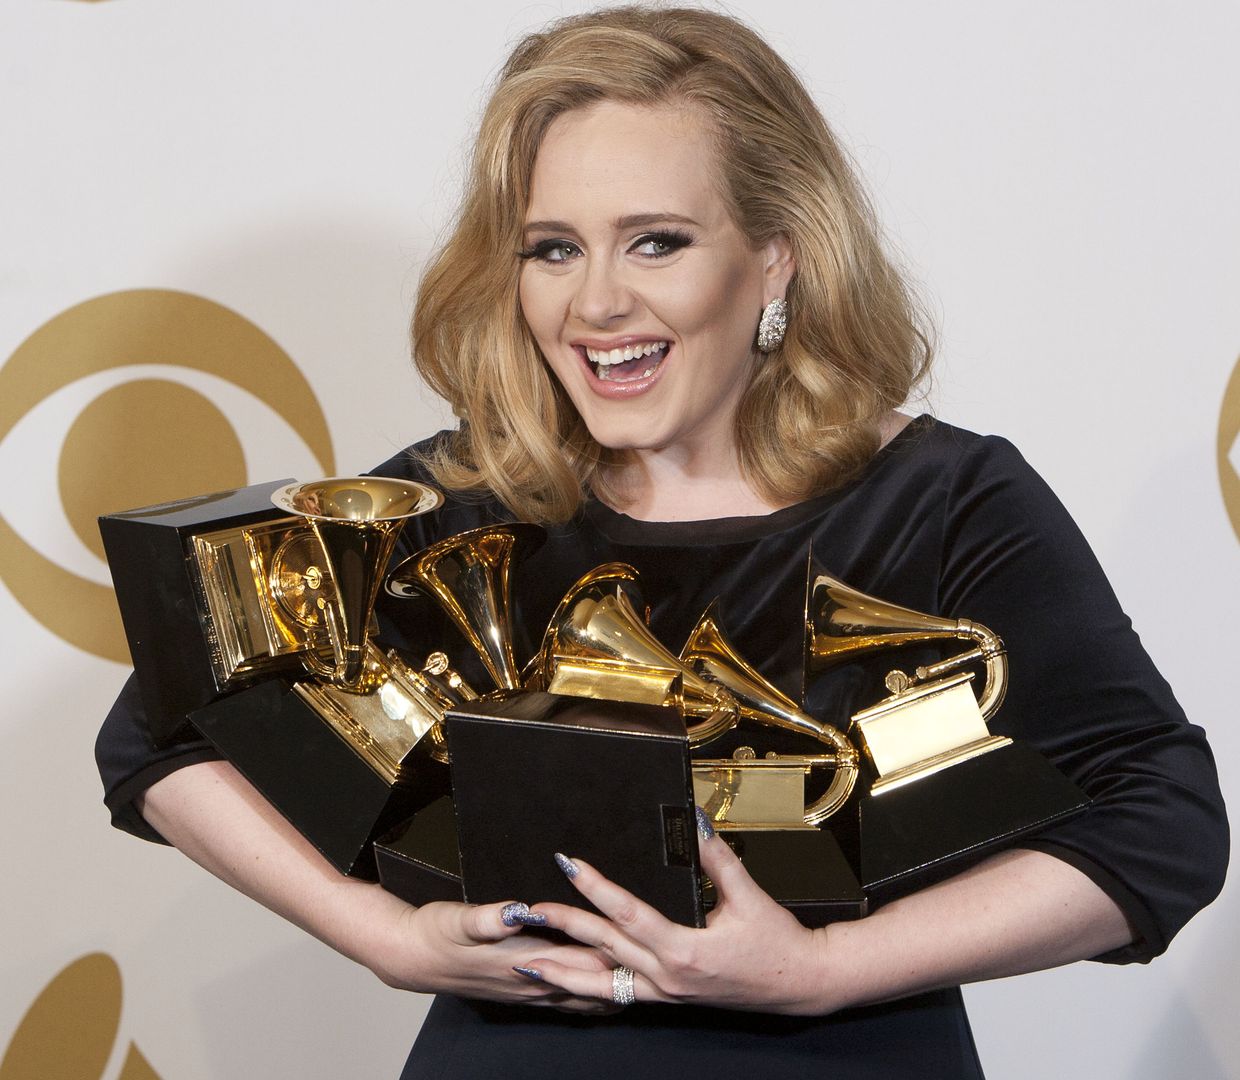 Feb. 12, 2012 - Los Angeles, California, U.S - British singer Adele poses in the press room with her six grammys including Song of the Year, Record of the Year, and Album of the Year for '21' at the 54th Annual GRAMMY Awards at Staples Center. (Credit Image: ďż˝ Armando Arorizo/ZUMAPRESS.com)